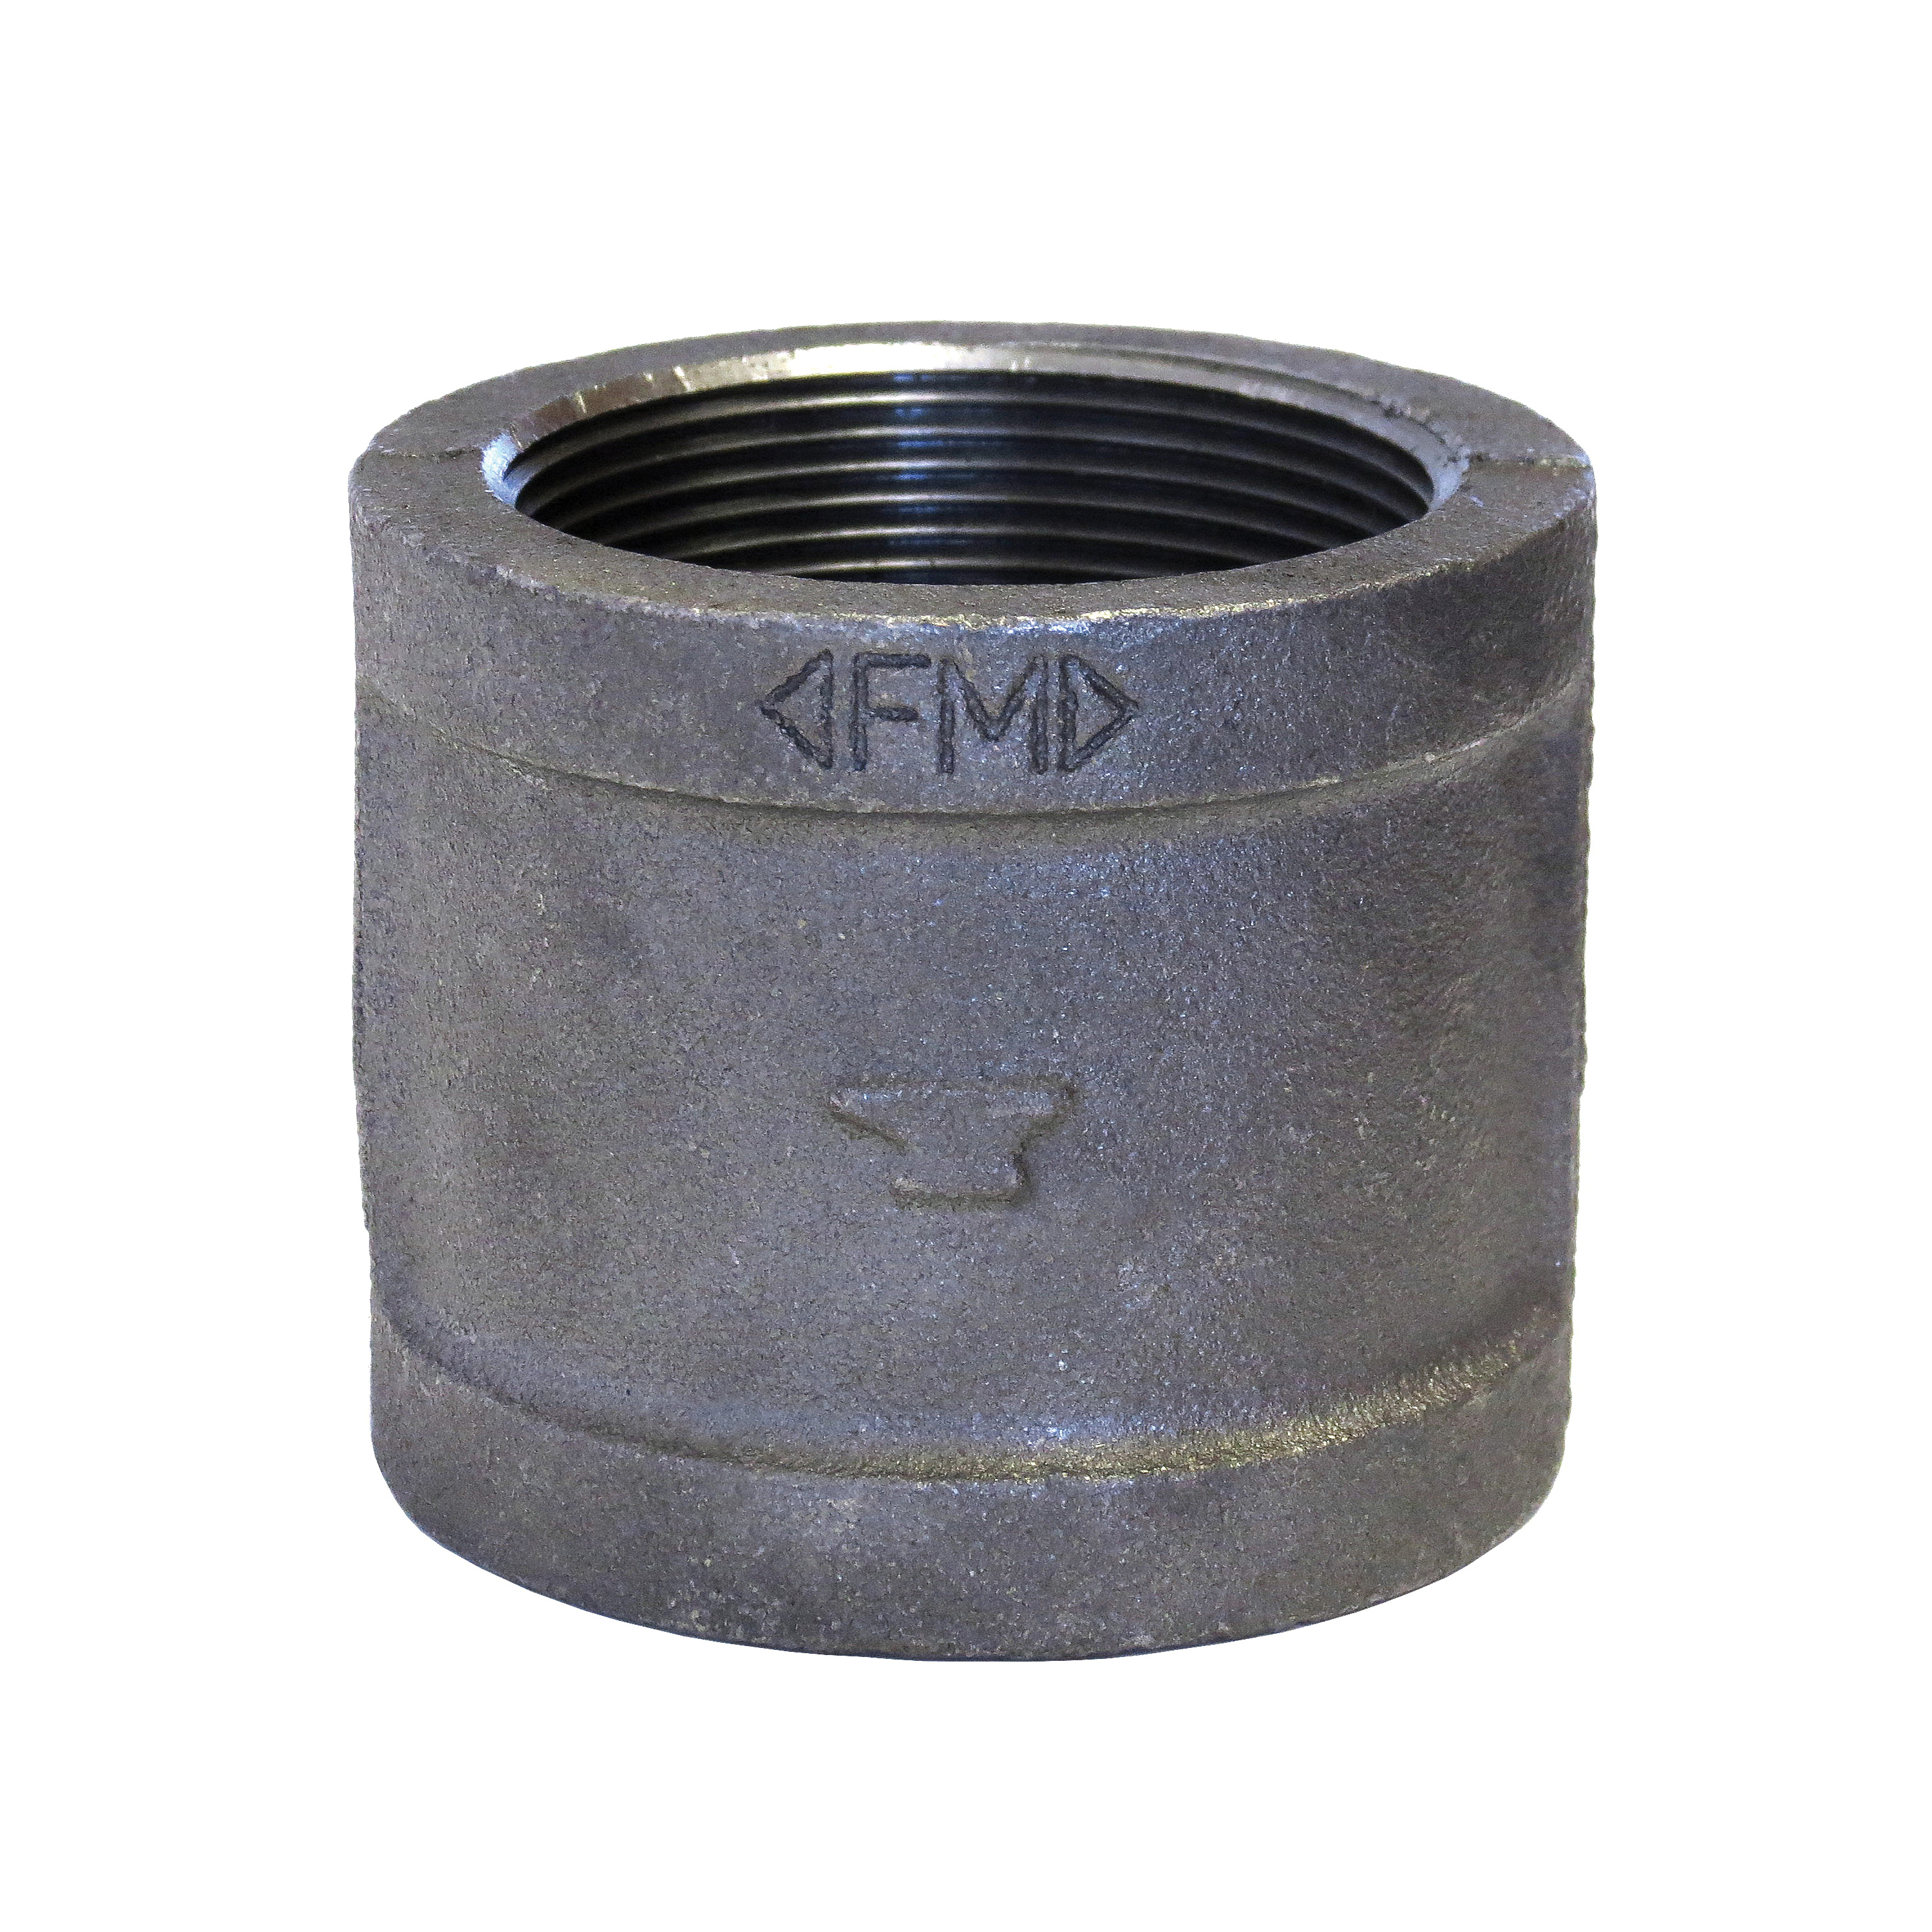 SPF/Anvil™ 0811080407 FIG 3121 Pipe Coupling, 3/4 in Nominal, FNPT End Style, 150 lb, Malleable Iron, Galvanized, Import